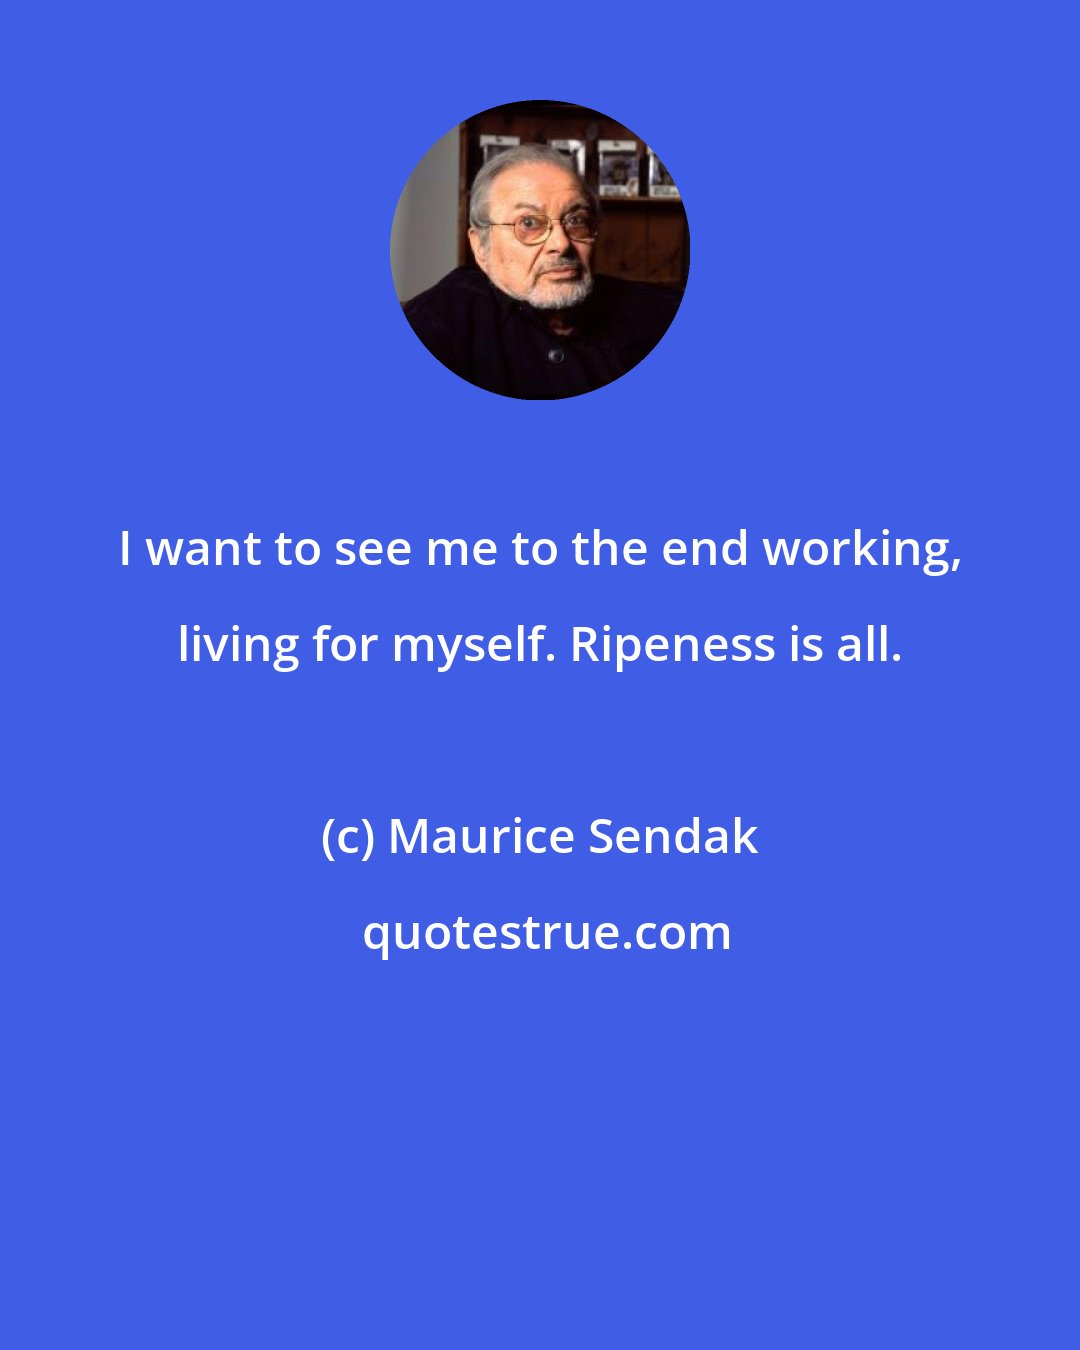 Maurice Sendak: I want to see me to the end working, living for myself. Ripeness is all.